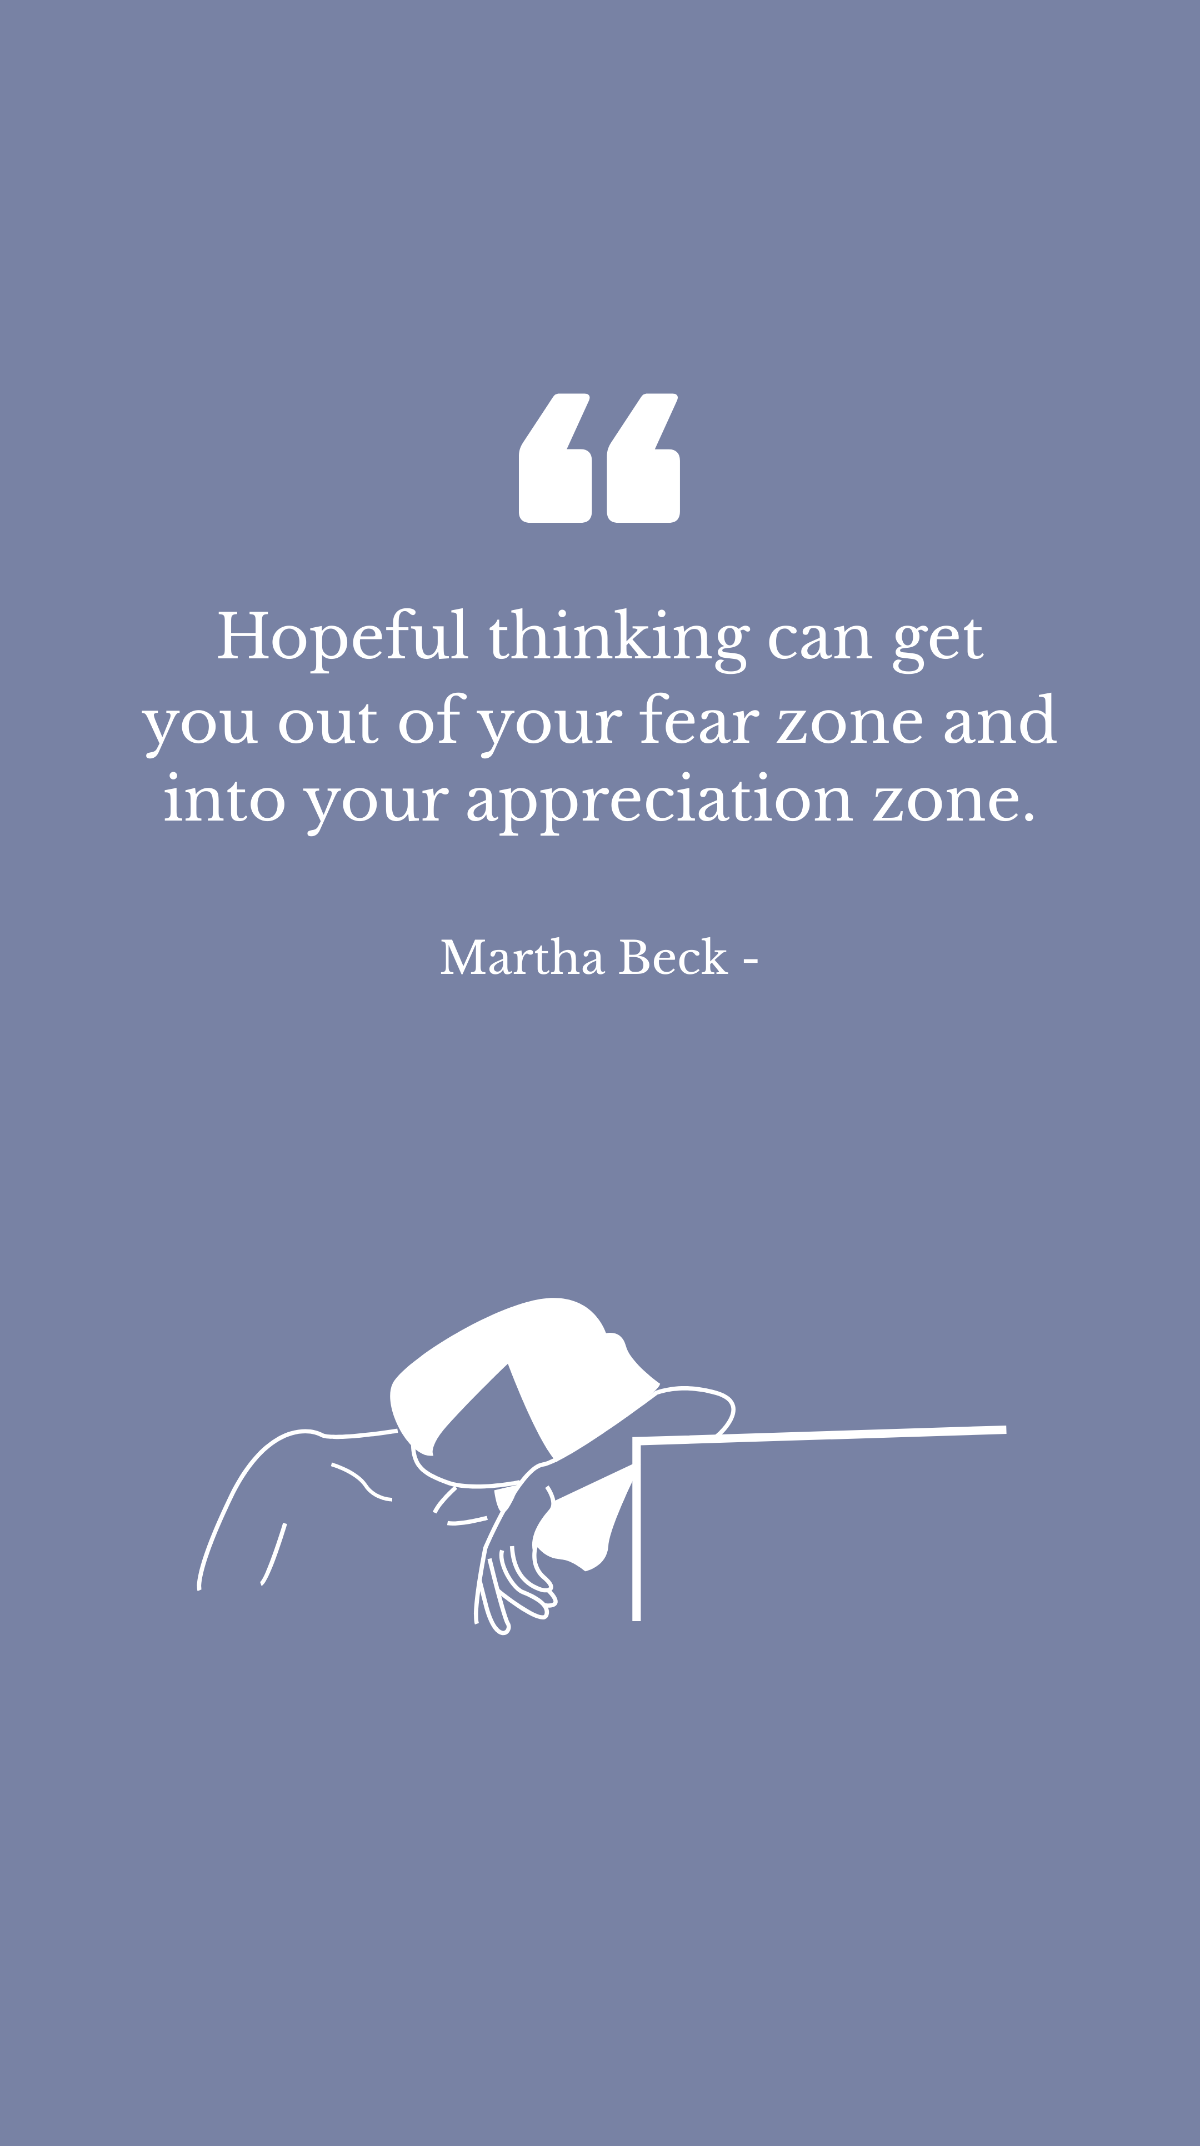 Martha Beck - Hopeful thinking can get you out of your fear zone and into your appreciation zone. Template